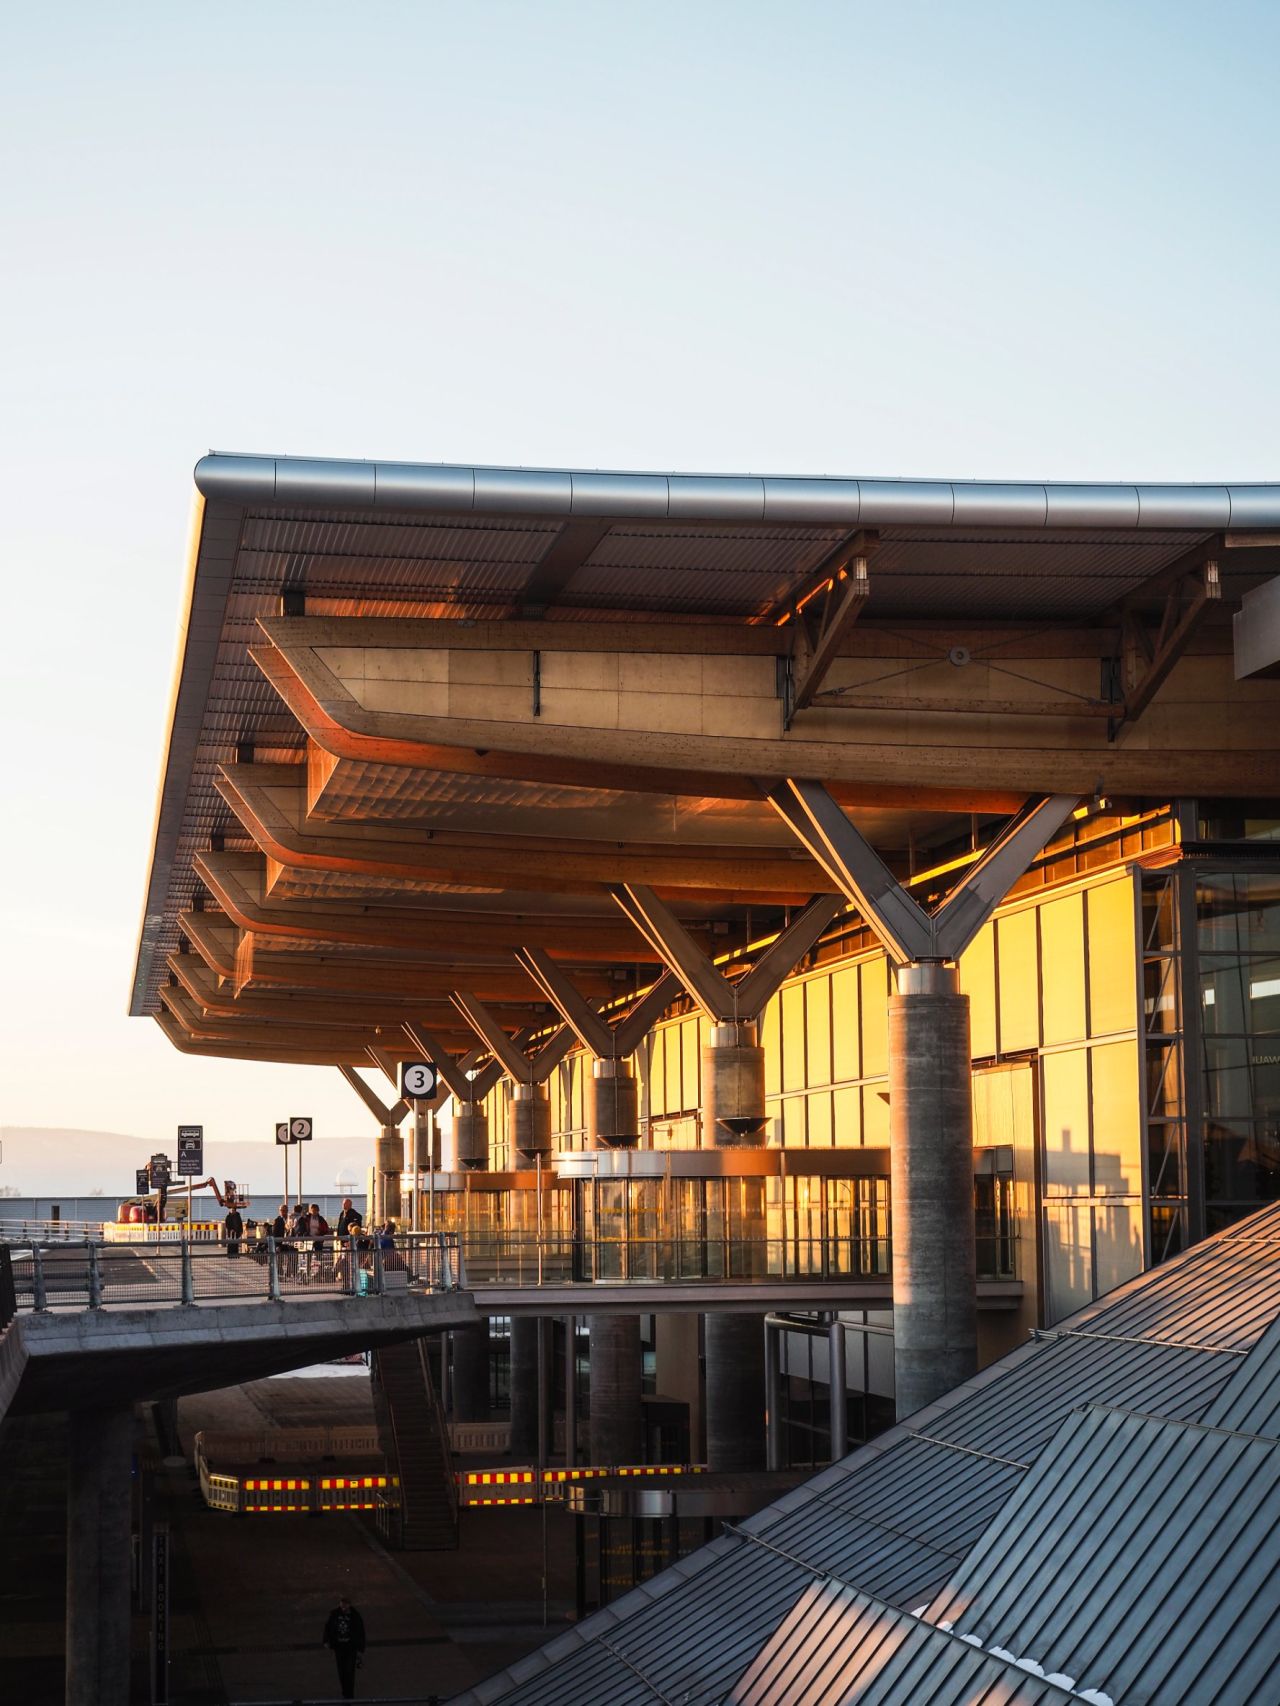 <strong>Seasonal:</strong> Come summer, the meltwater is used to cool down the terminal building, reducing energy consumption at peak times. In winter, the airport makes use of natural thermal energy for heating.